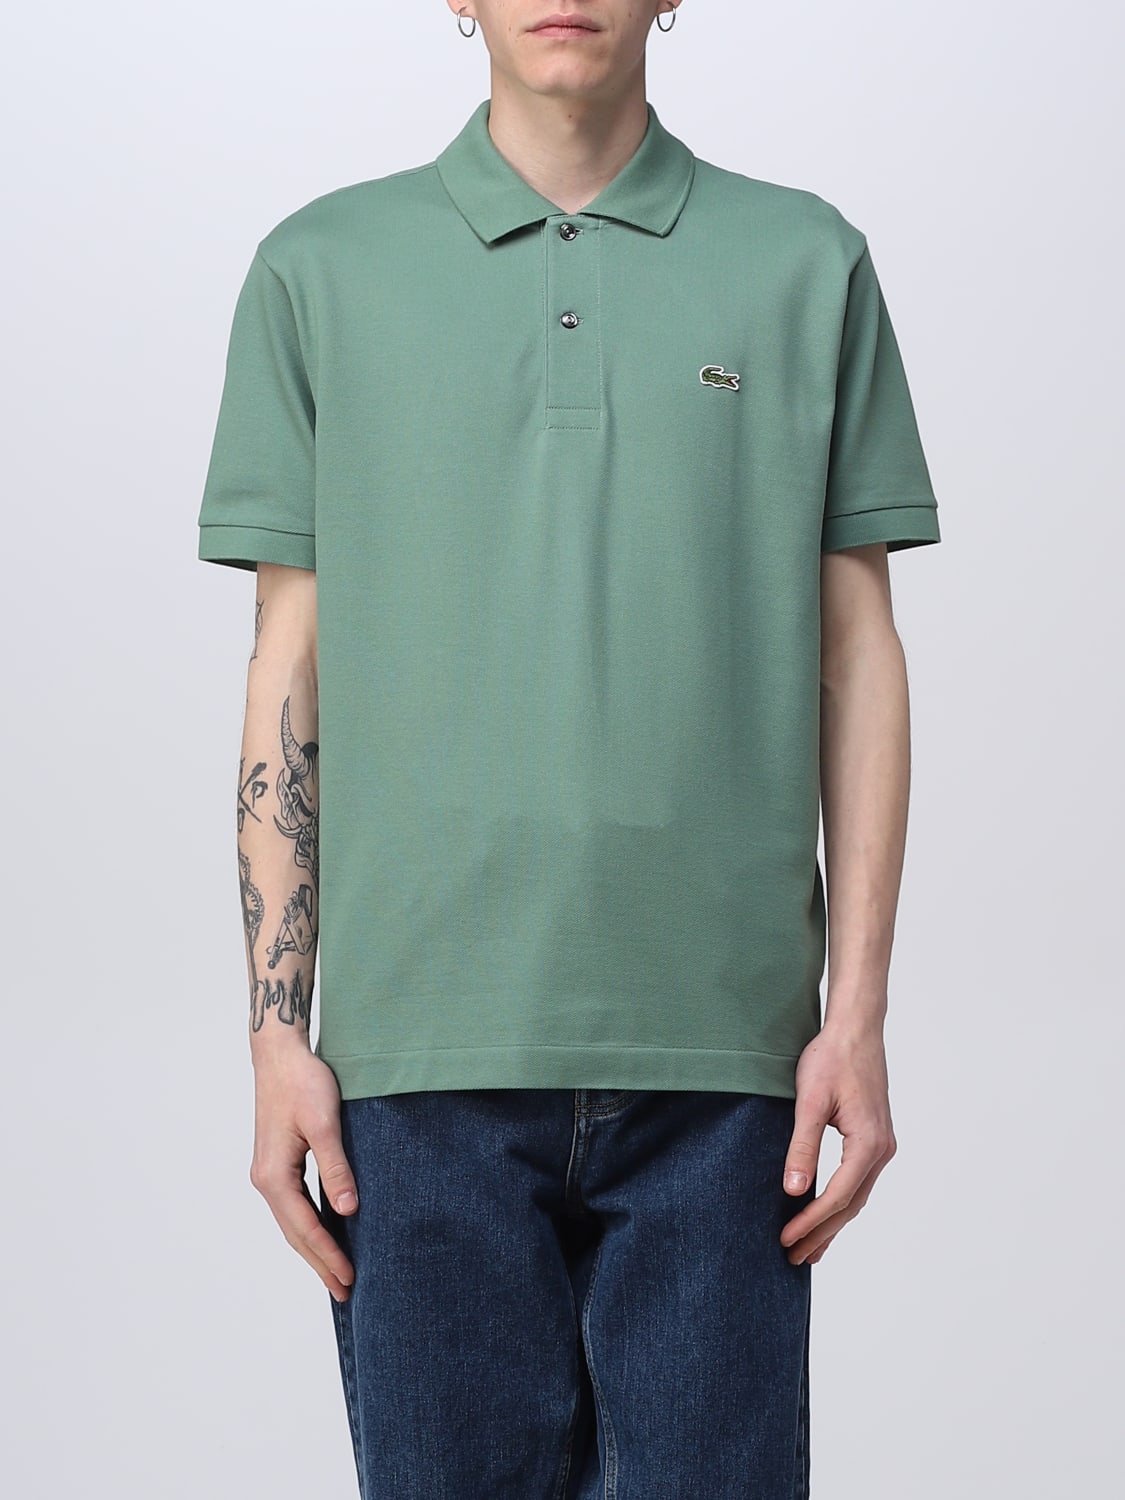 Outlet: polo shirt for man Forest Green Lacoste polo shirt AB1212 online at GIGLIO.COM